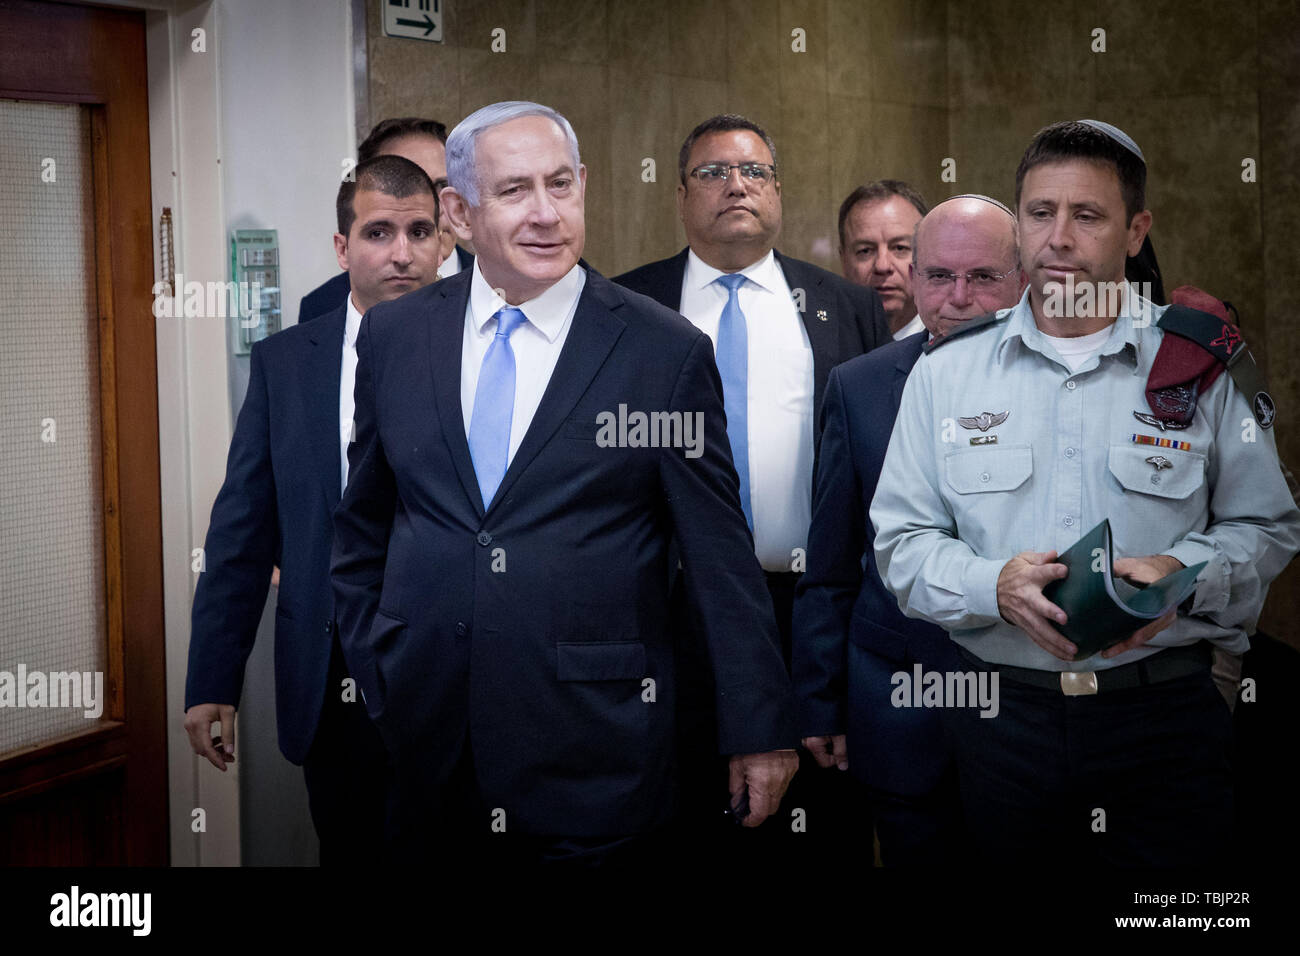 Jerusalem. 2nd June, 2019. Israeli Prime Minister Benjamin Netanyahu (Front) attends the weekly cabinet meeting in Jerusalem, June 2, 2019. The Israeli parliament, known as the Knesset, dissolved itself last Wednesday and scheduled another general election for mid-September of this year. The development came after Israeli Prime Minister Benjamin Netanyahu failed to form a coalition government. Credit: JINI/Yonatan Sindel/Xinhua/Alamy Live News Stock Photo